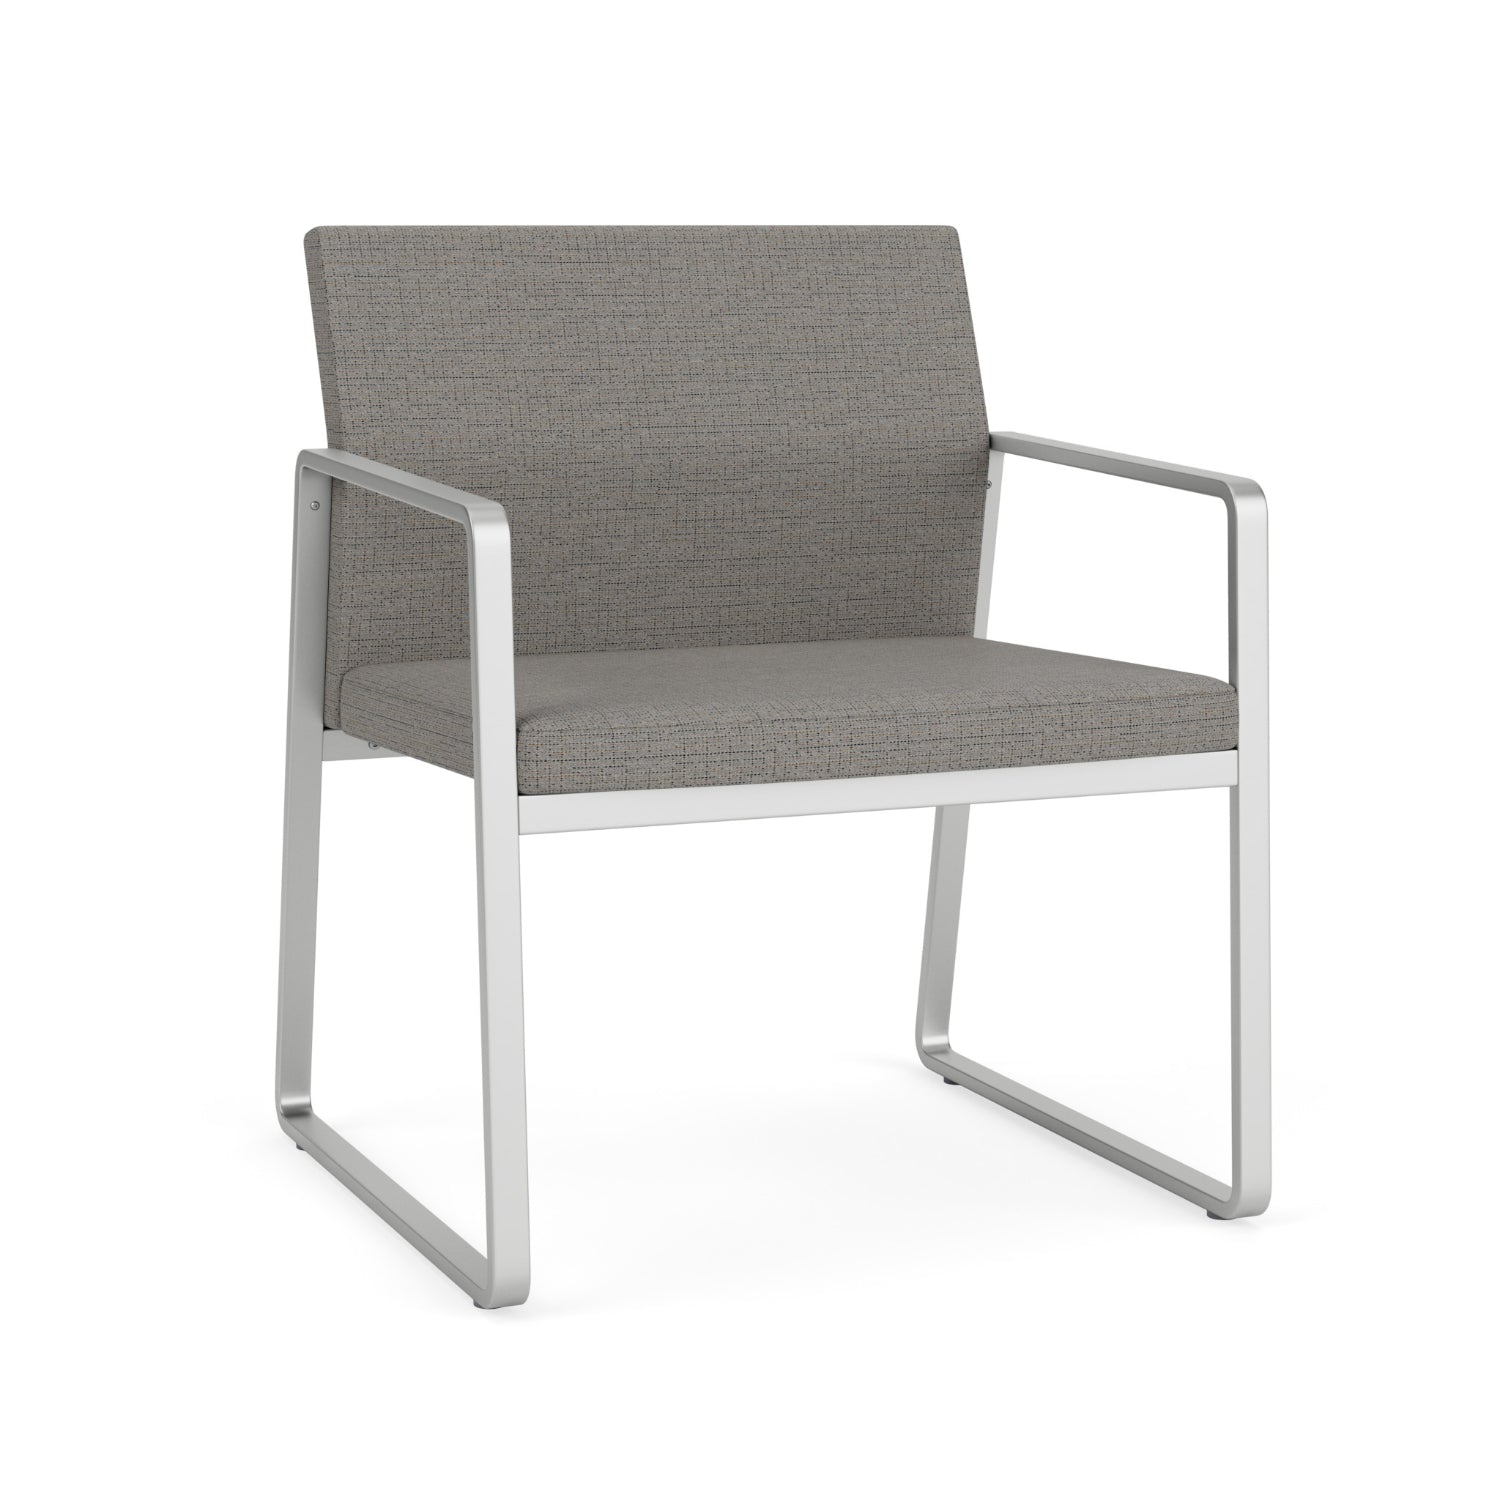 Gansett Collection Reception Seating, Oversize Guest Chair, 400 lb. Capacity, Designer Fabric Upholstery, FREE SHIPPING